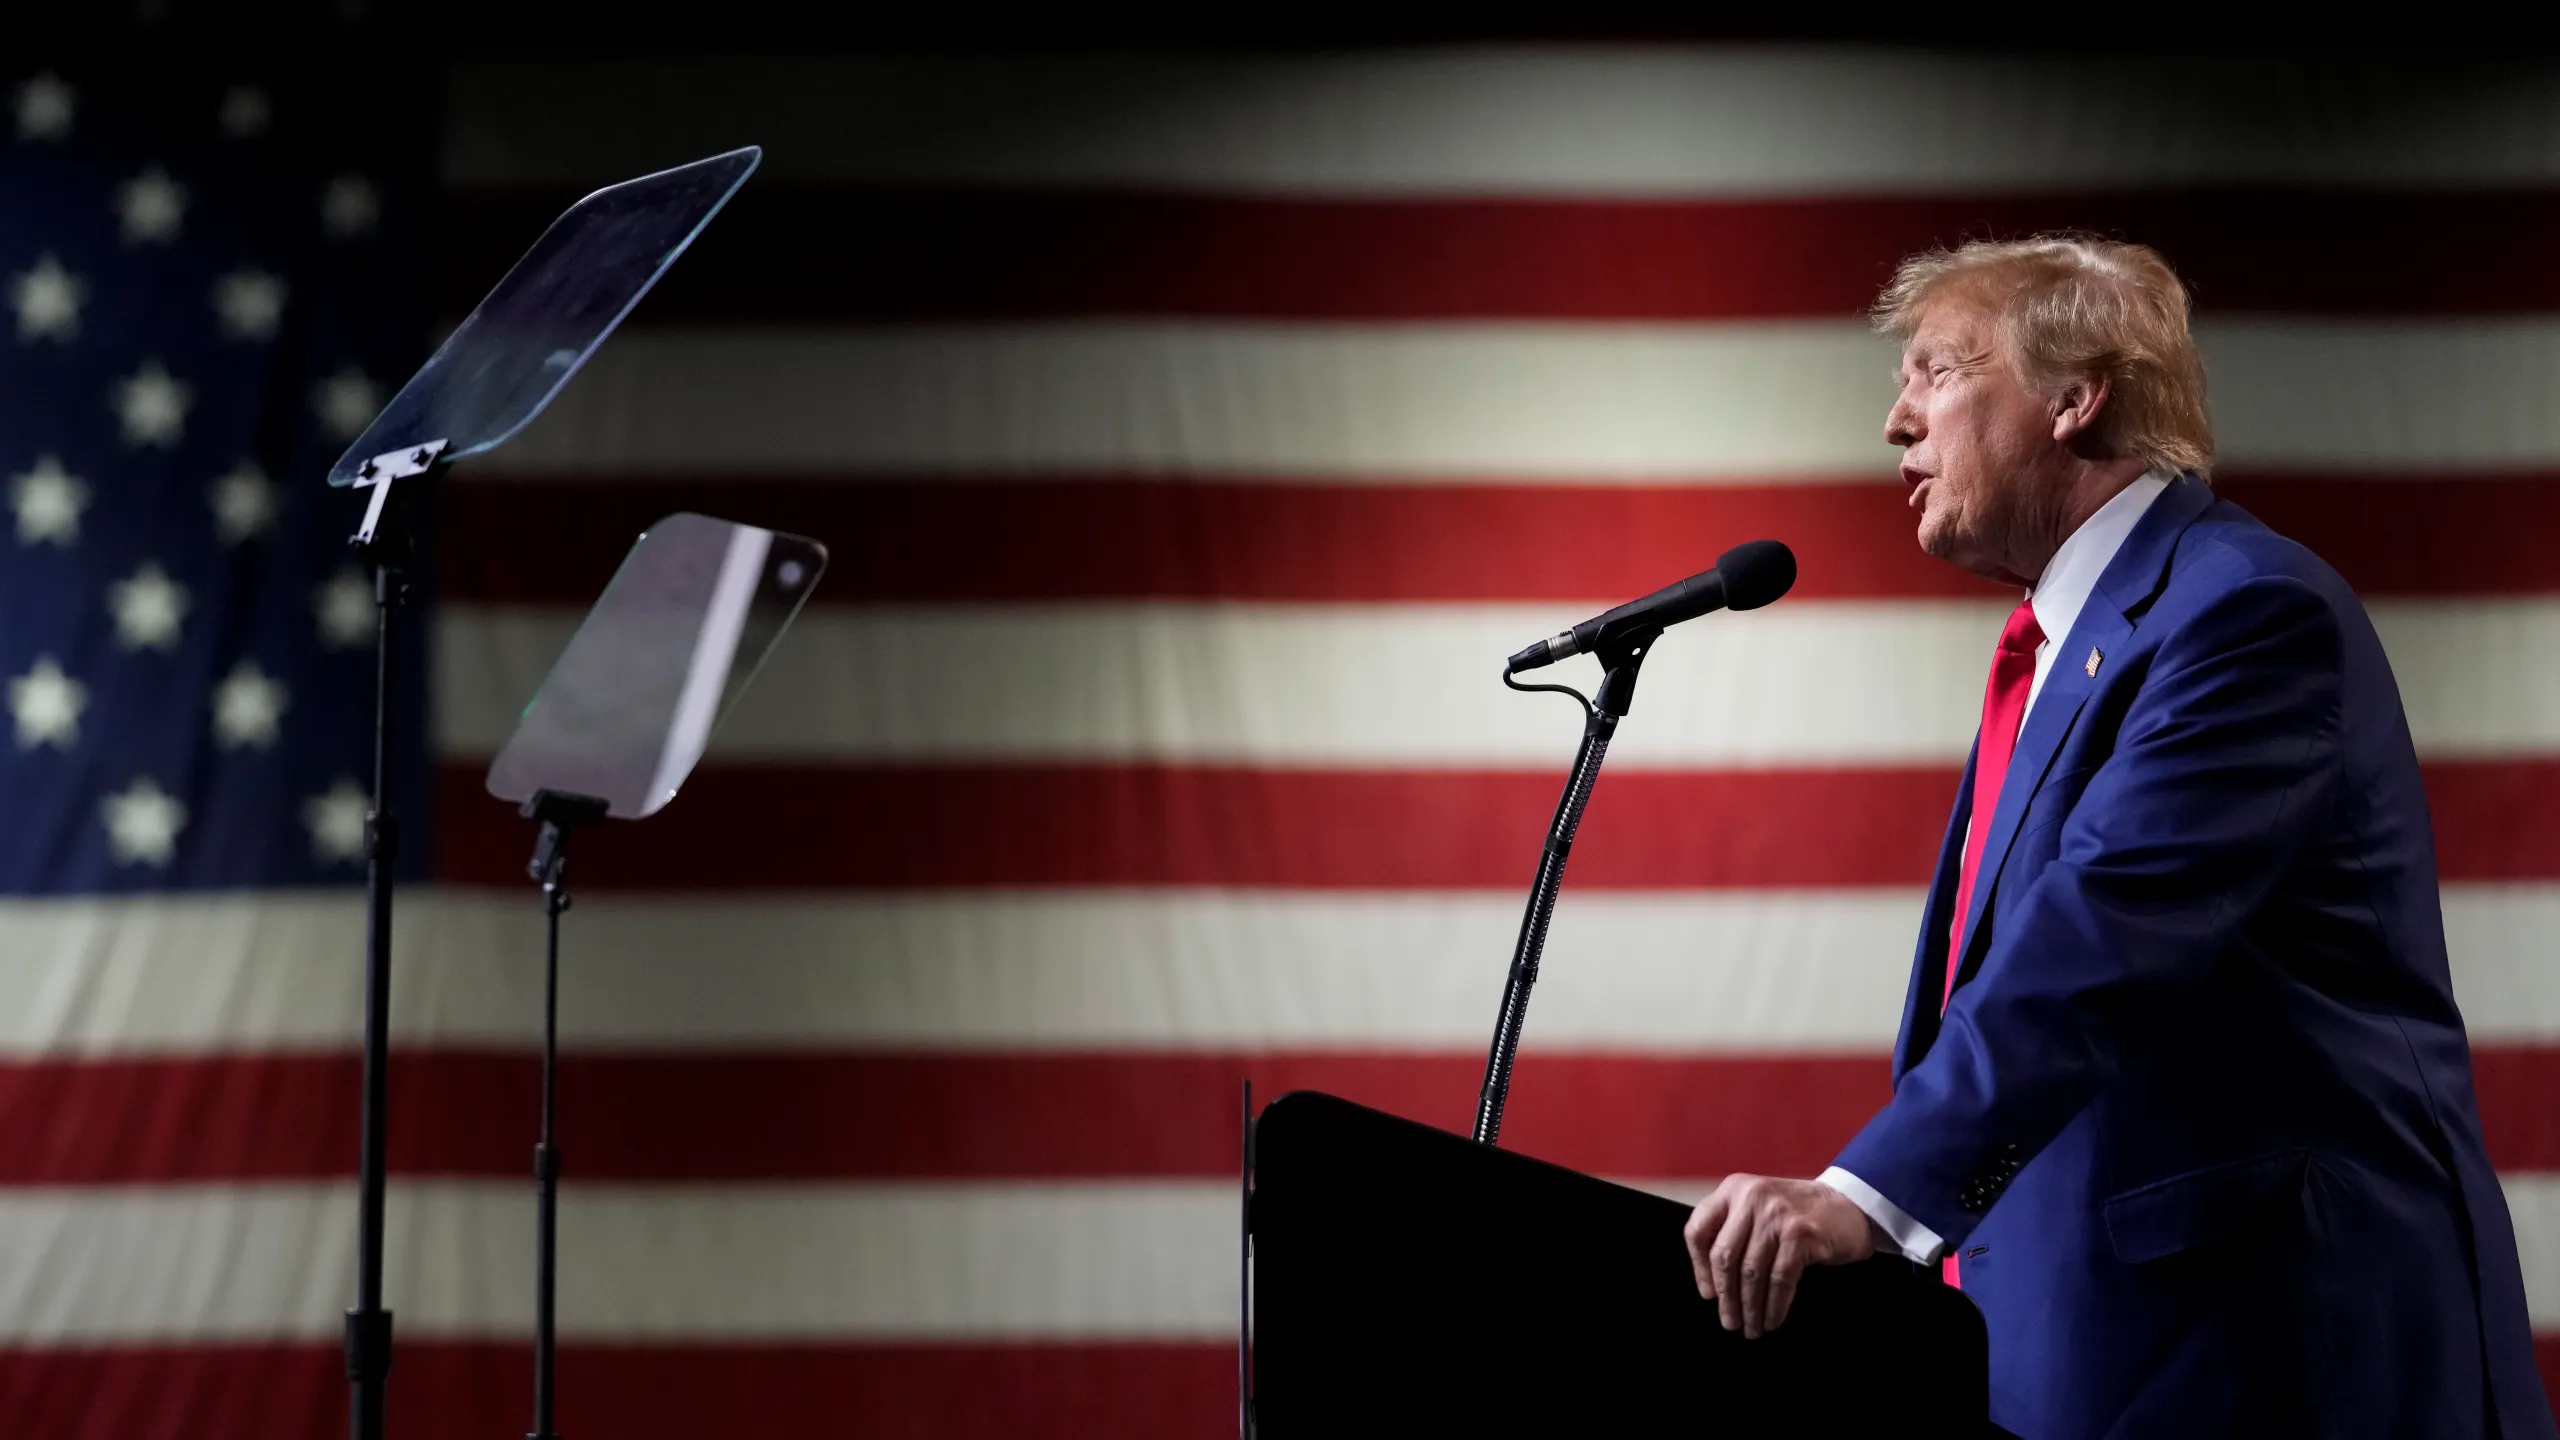 Donald Trump speaking while standing on dice with American flag in background.